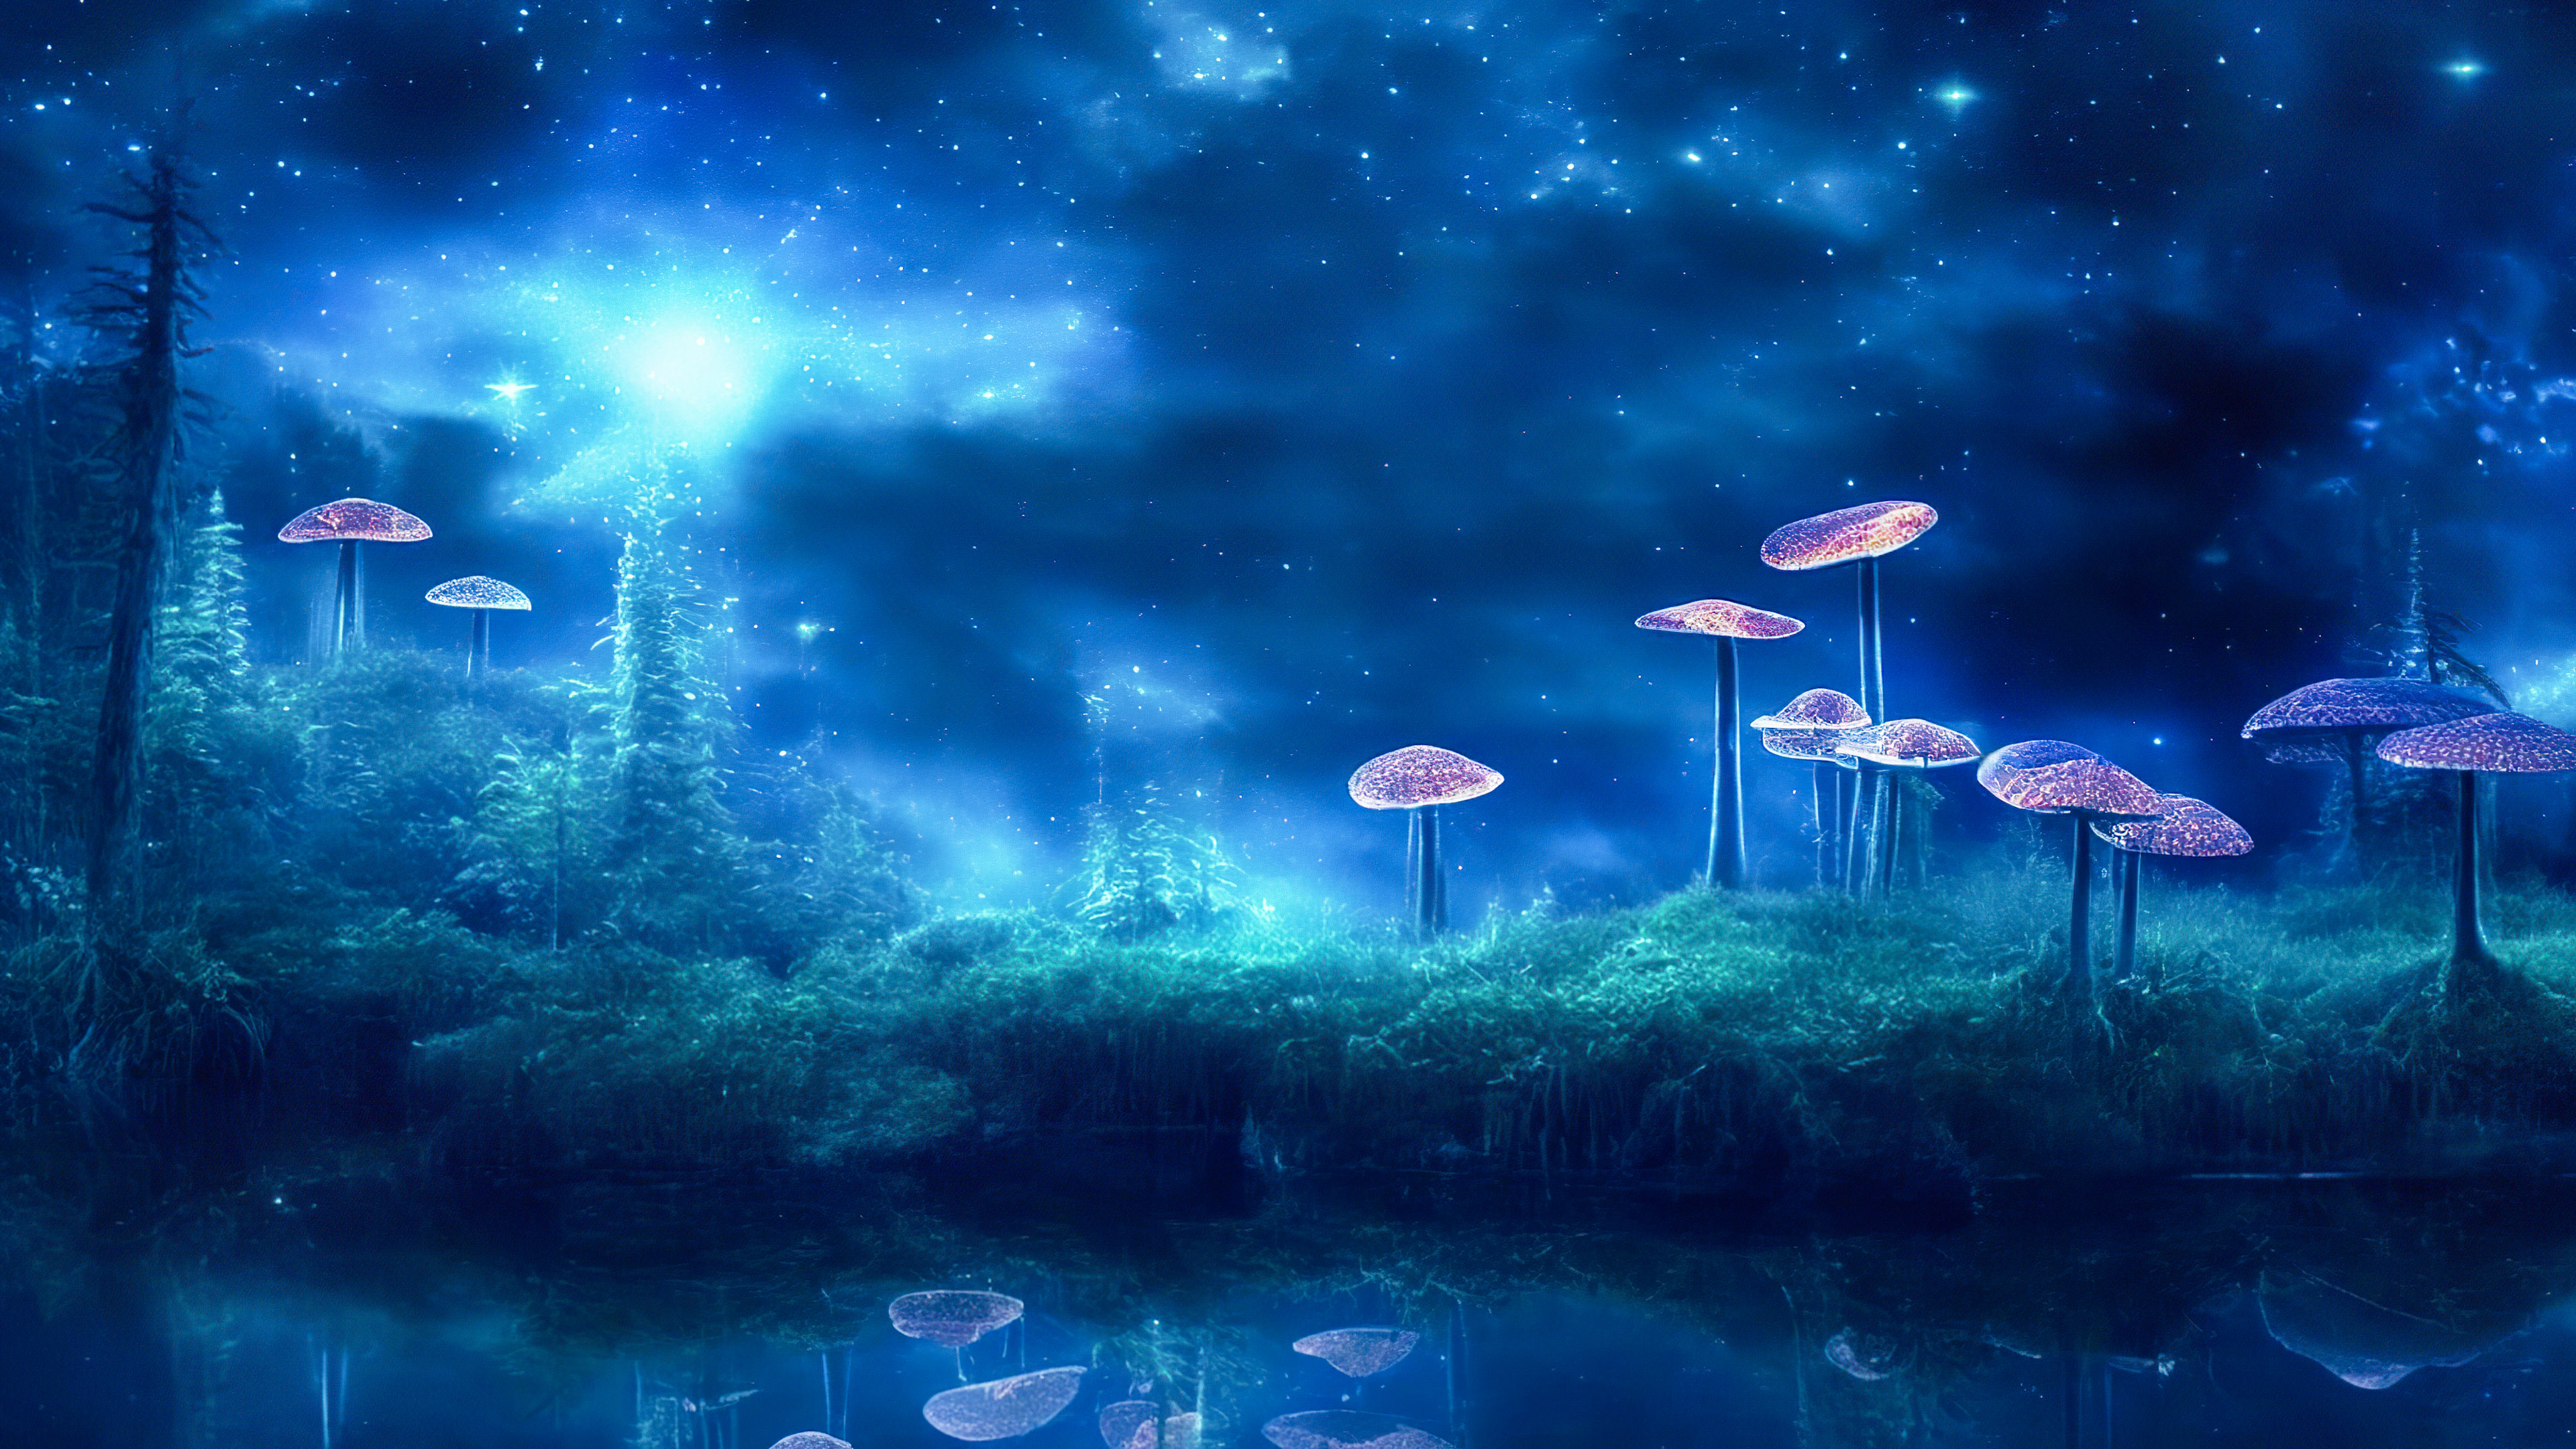 Get lost in the enchantment of our cool night wallpaper, showcasing a mystical glen with bioluminescent mushrooms, creating an otherworldly scene.